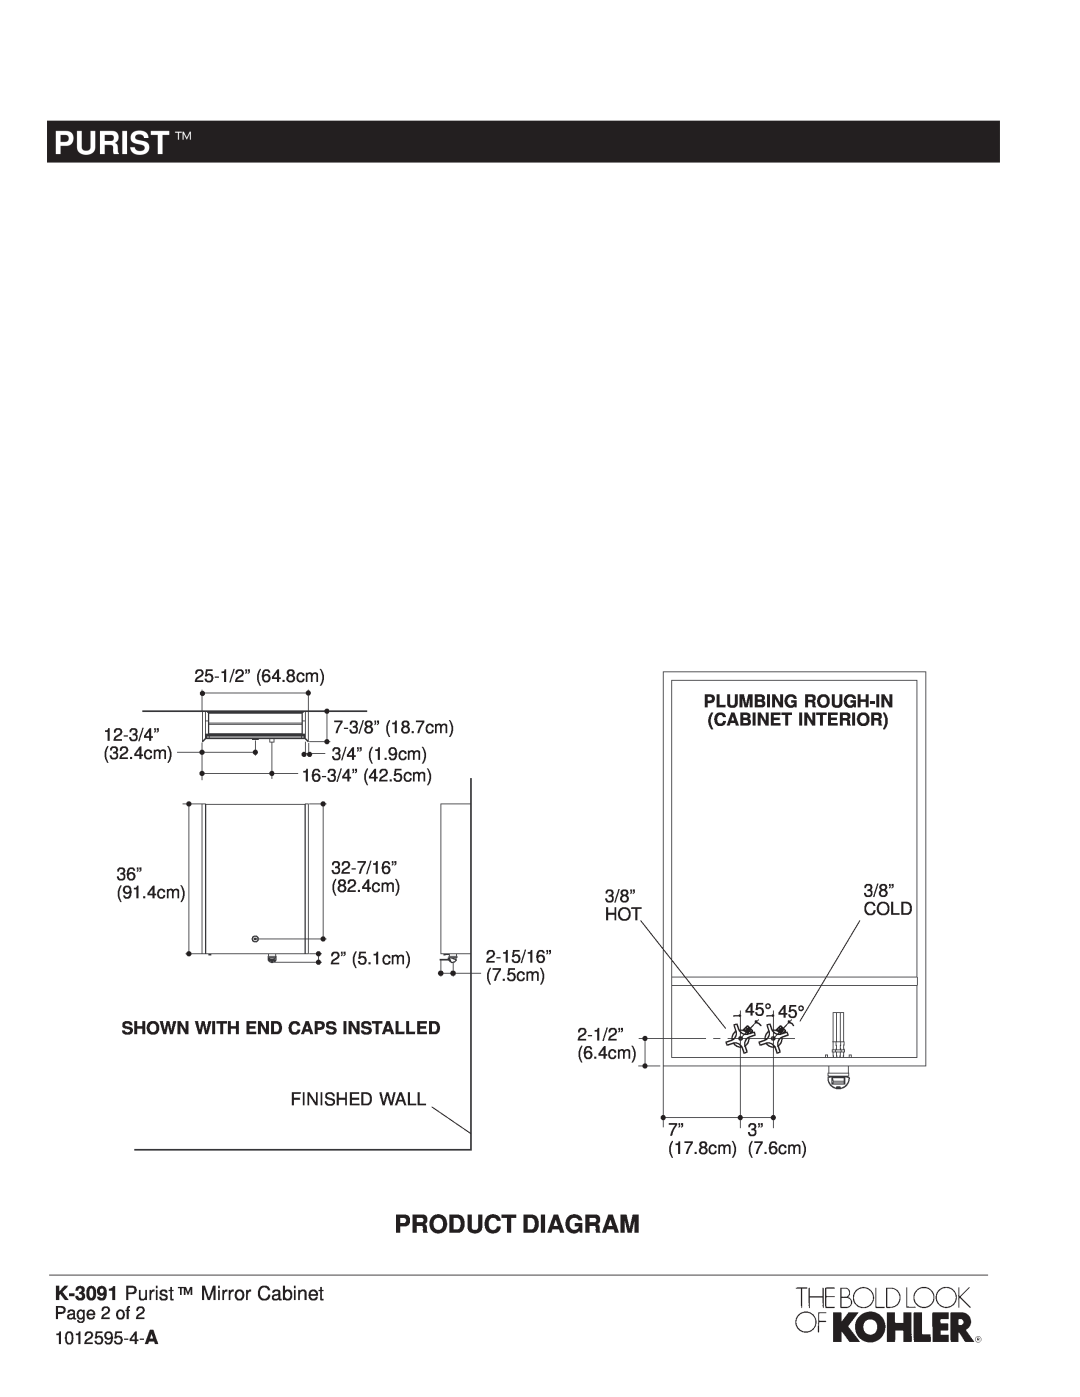 Kohler K-3091 manual PURISTt, Product Diagram, Shown With End Caps Installed, Plumbing Rough-Incabinet Interior 